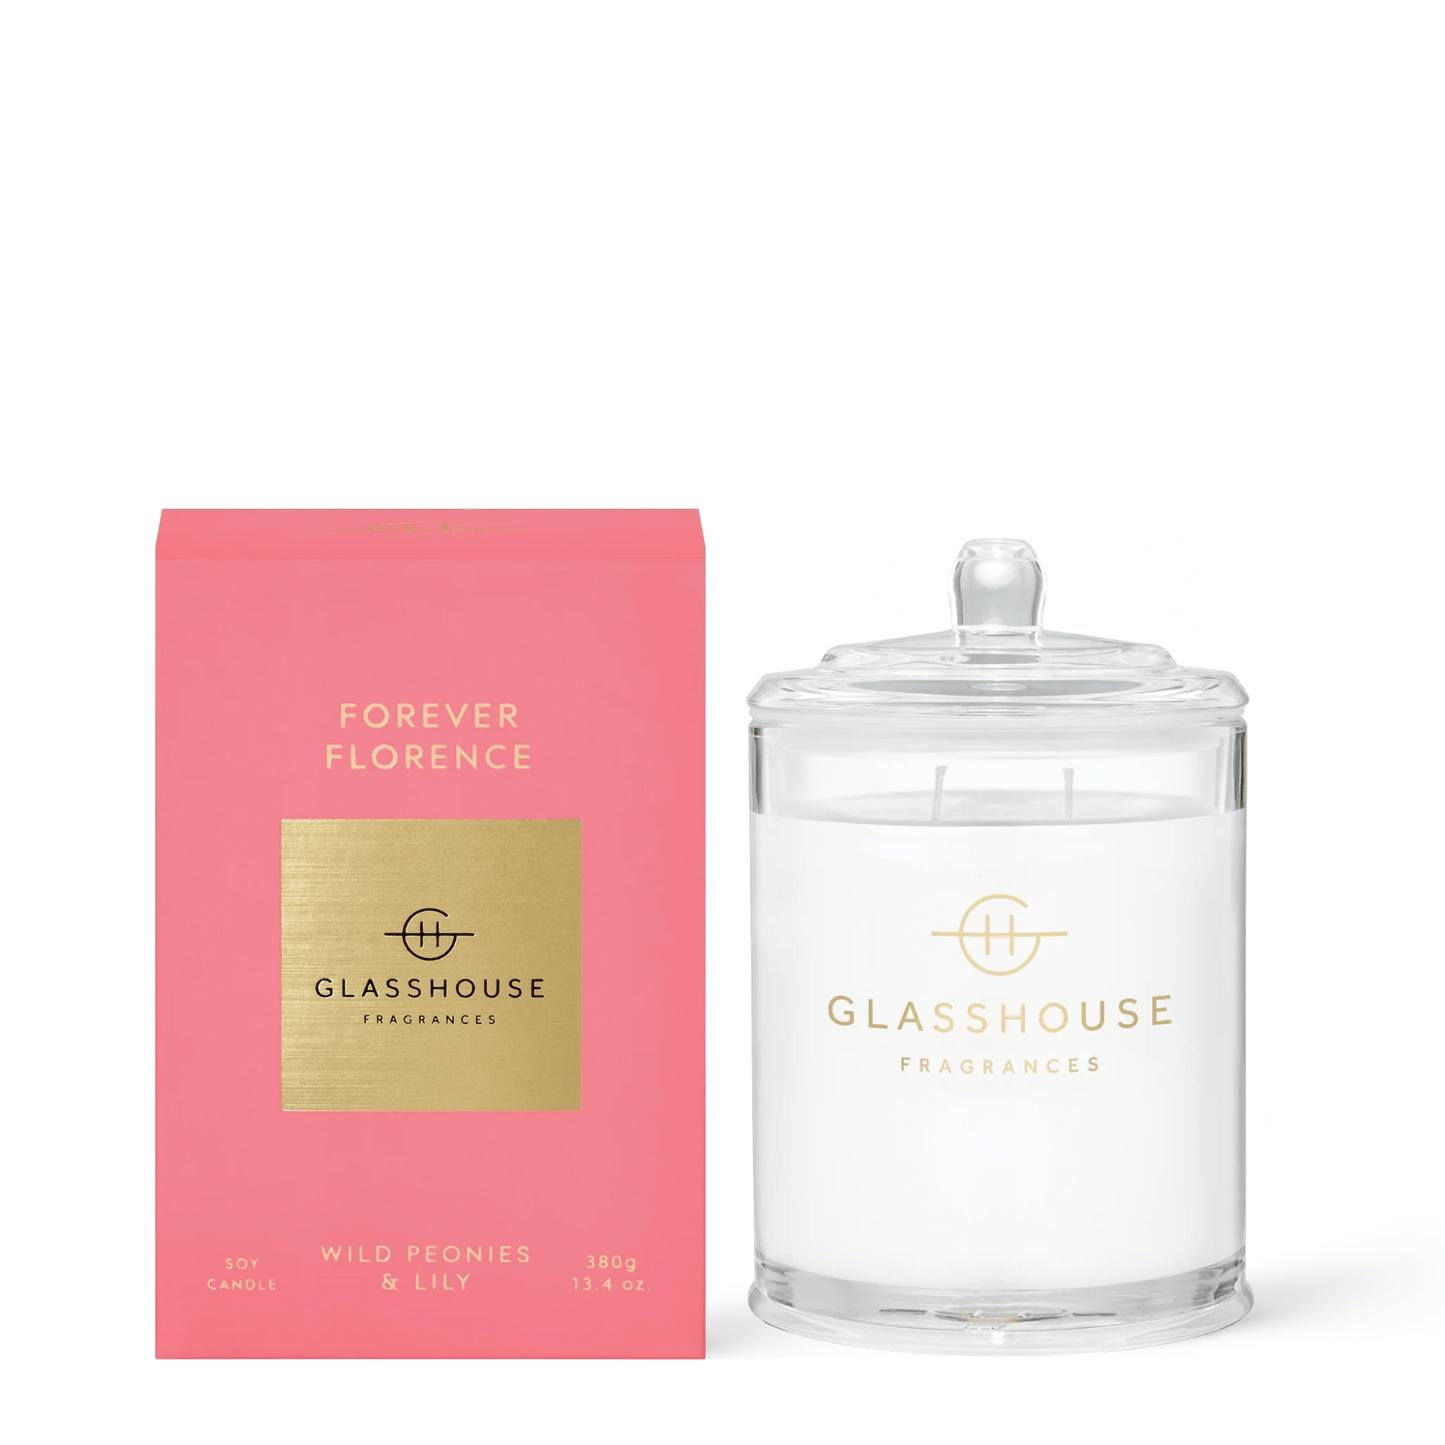 Primary Image of Forever Florence Candle